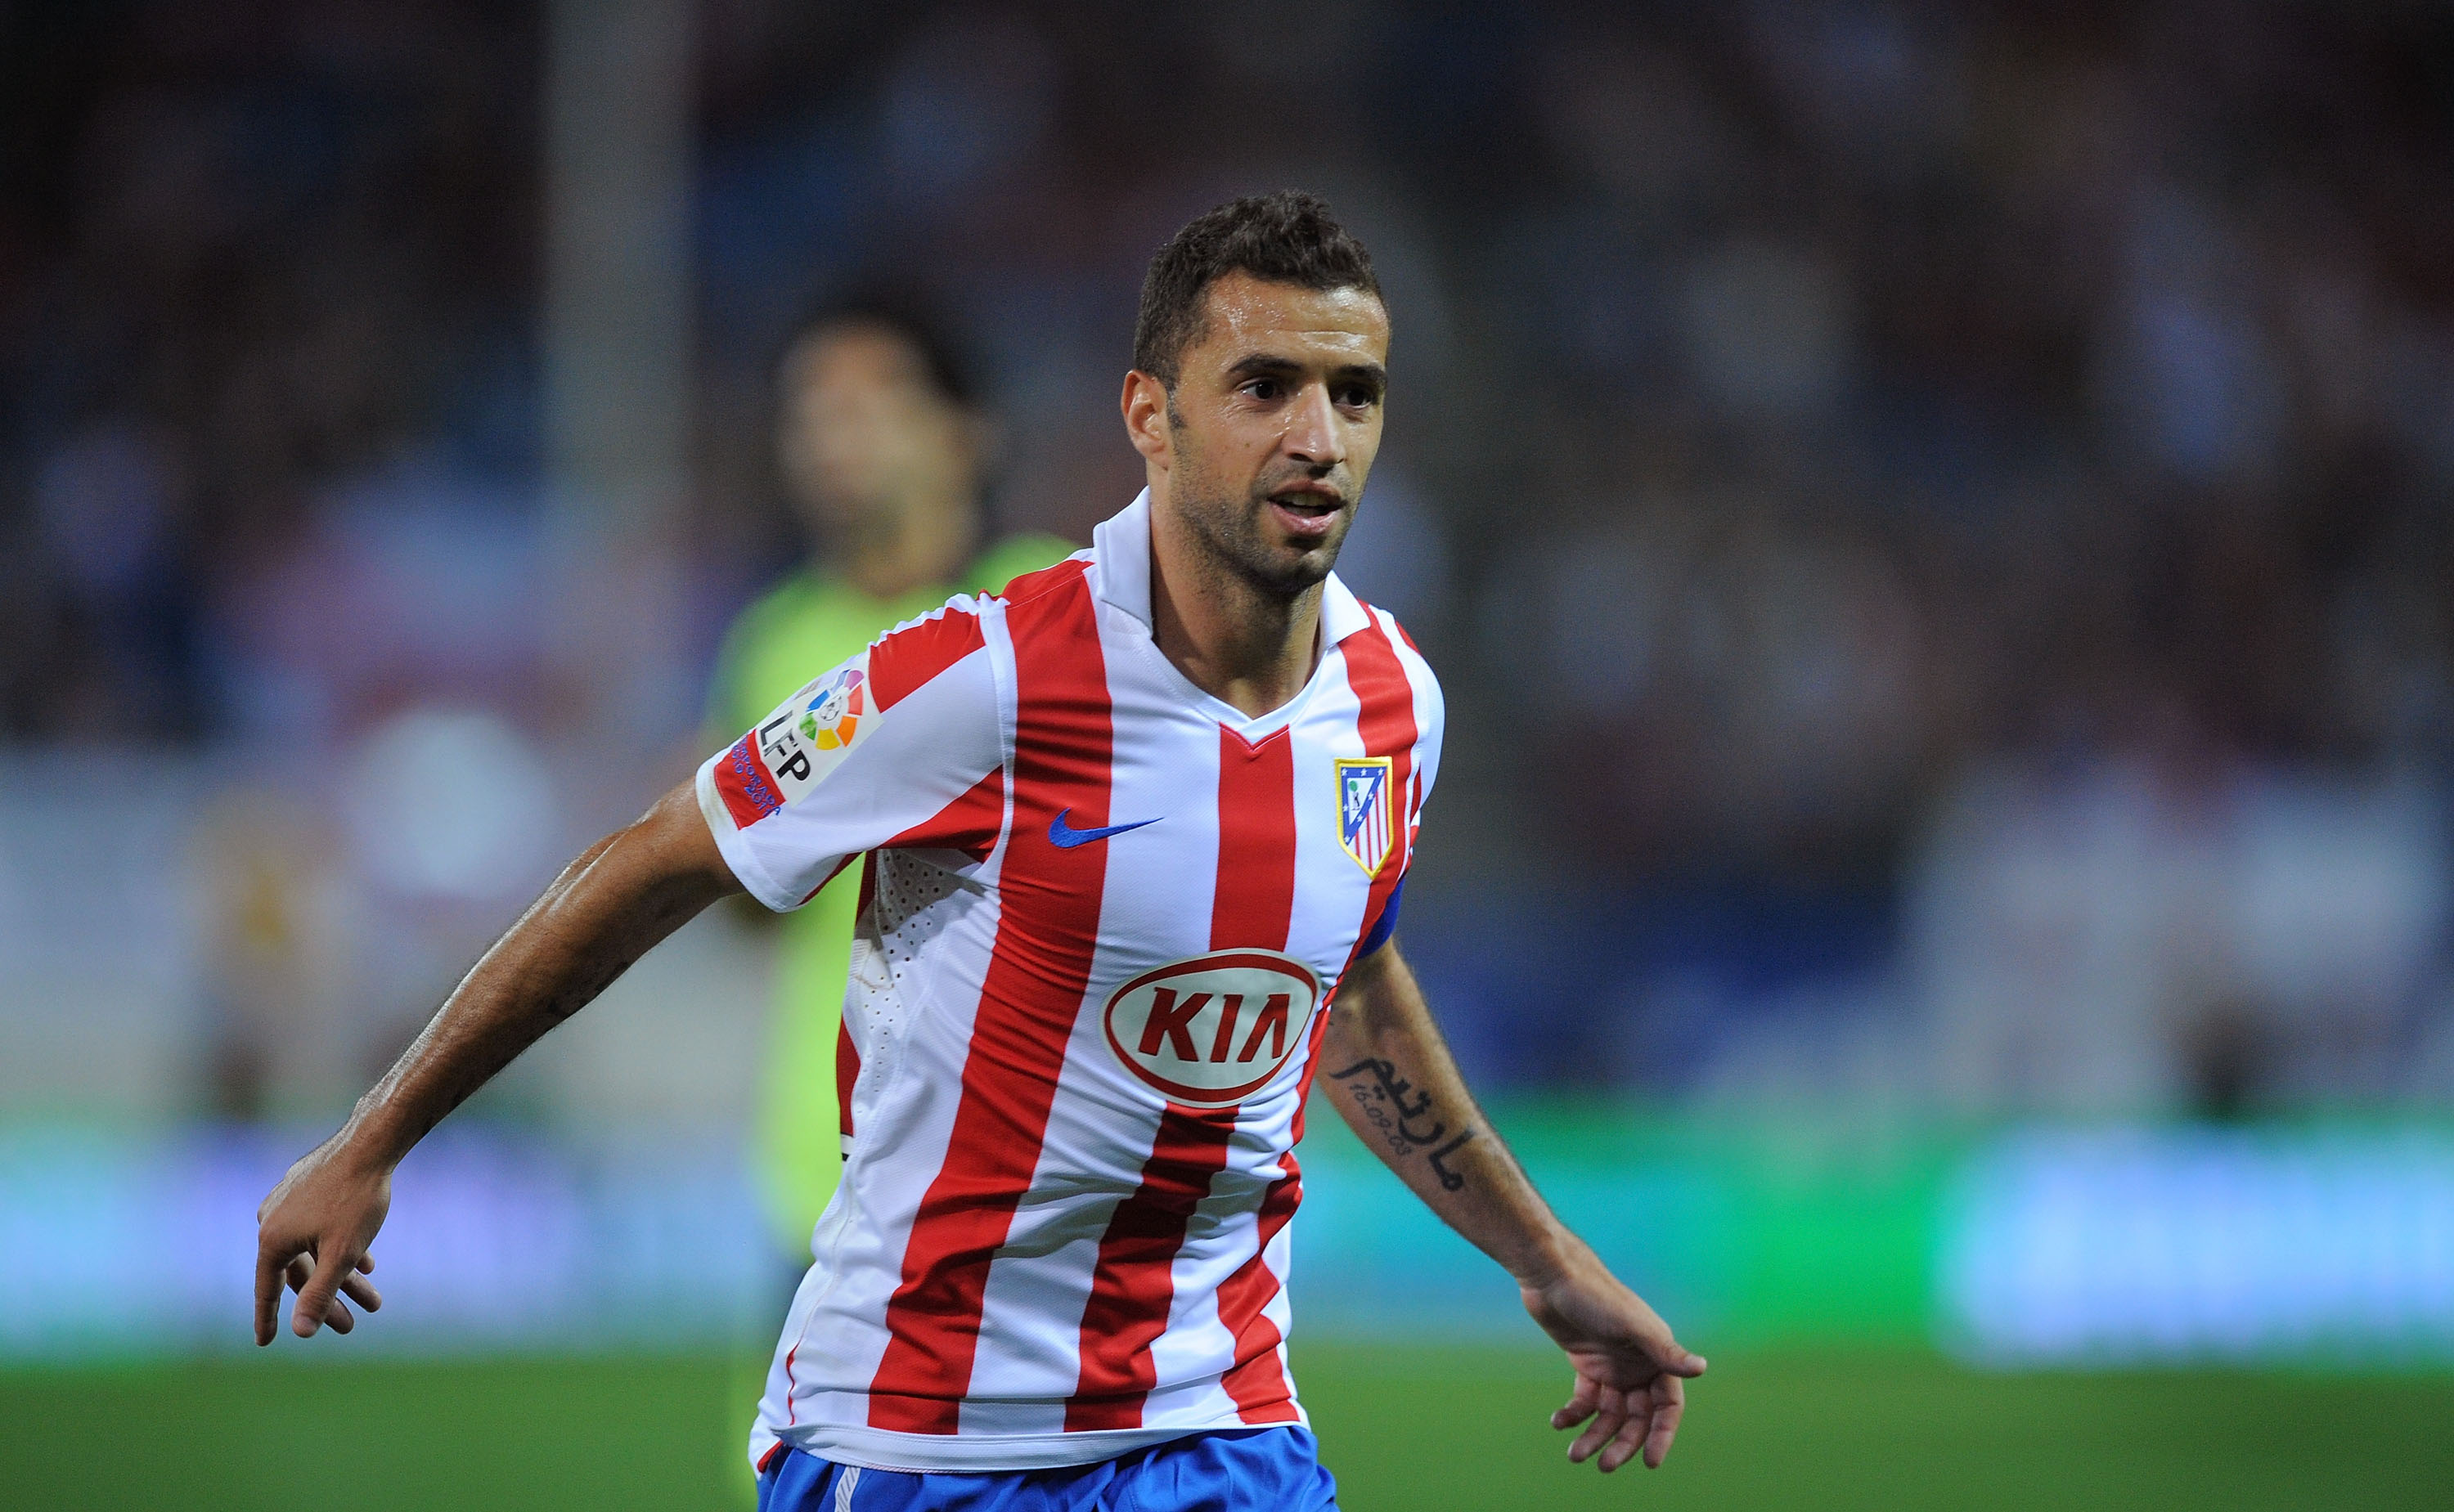 MADRID, SPAIN - SEPTEMBER 26:  Simao of Atletico Madrid in action during the La Liga match between Atletico Madrid and Real Zaragoza at the Vicente Calderon stadium on September 26, 2010 in Madrid, Spain.  (Photo by Denis Doyle/Getty Images)